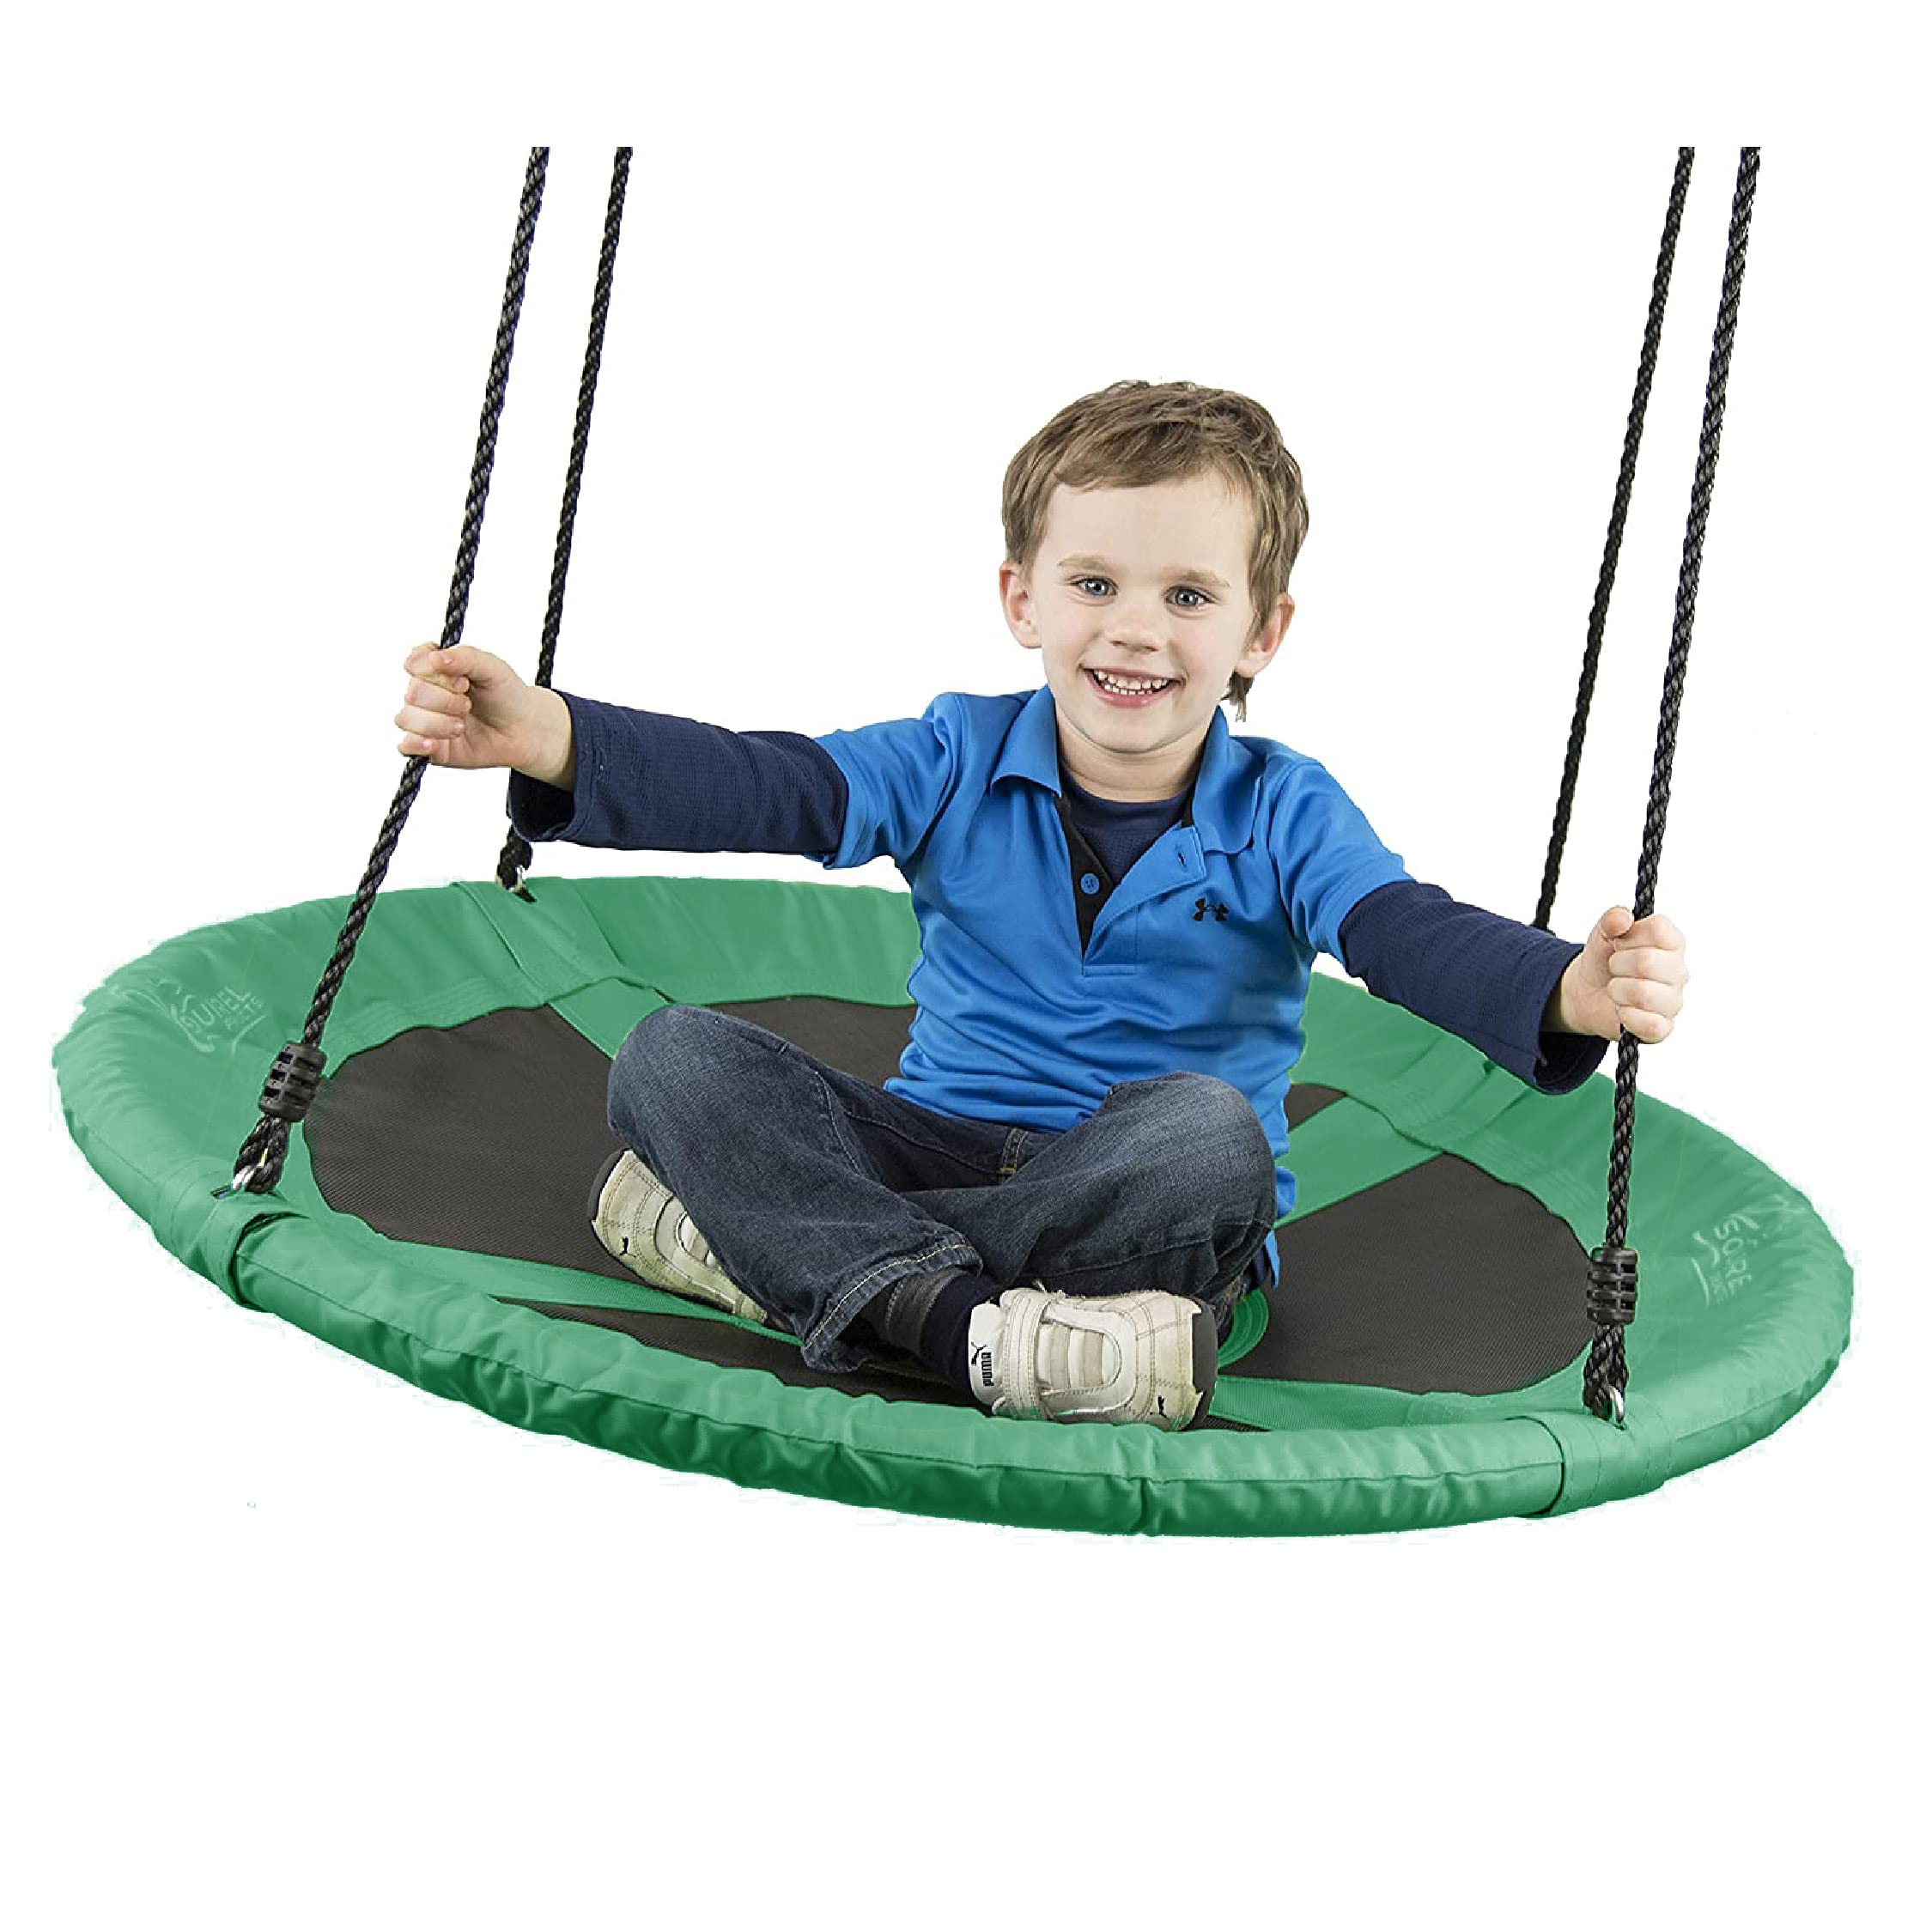 Flying Squirrel Giant Rope Swing - 40 Saucer Tree Swing- Additions &  Replacements for Active Outdoor Play Equipment - Green